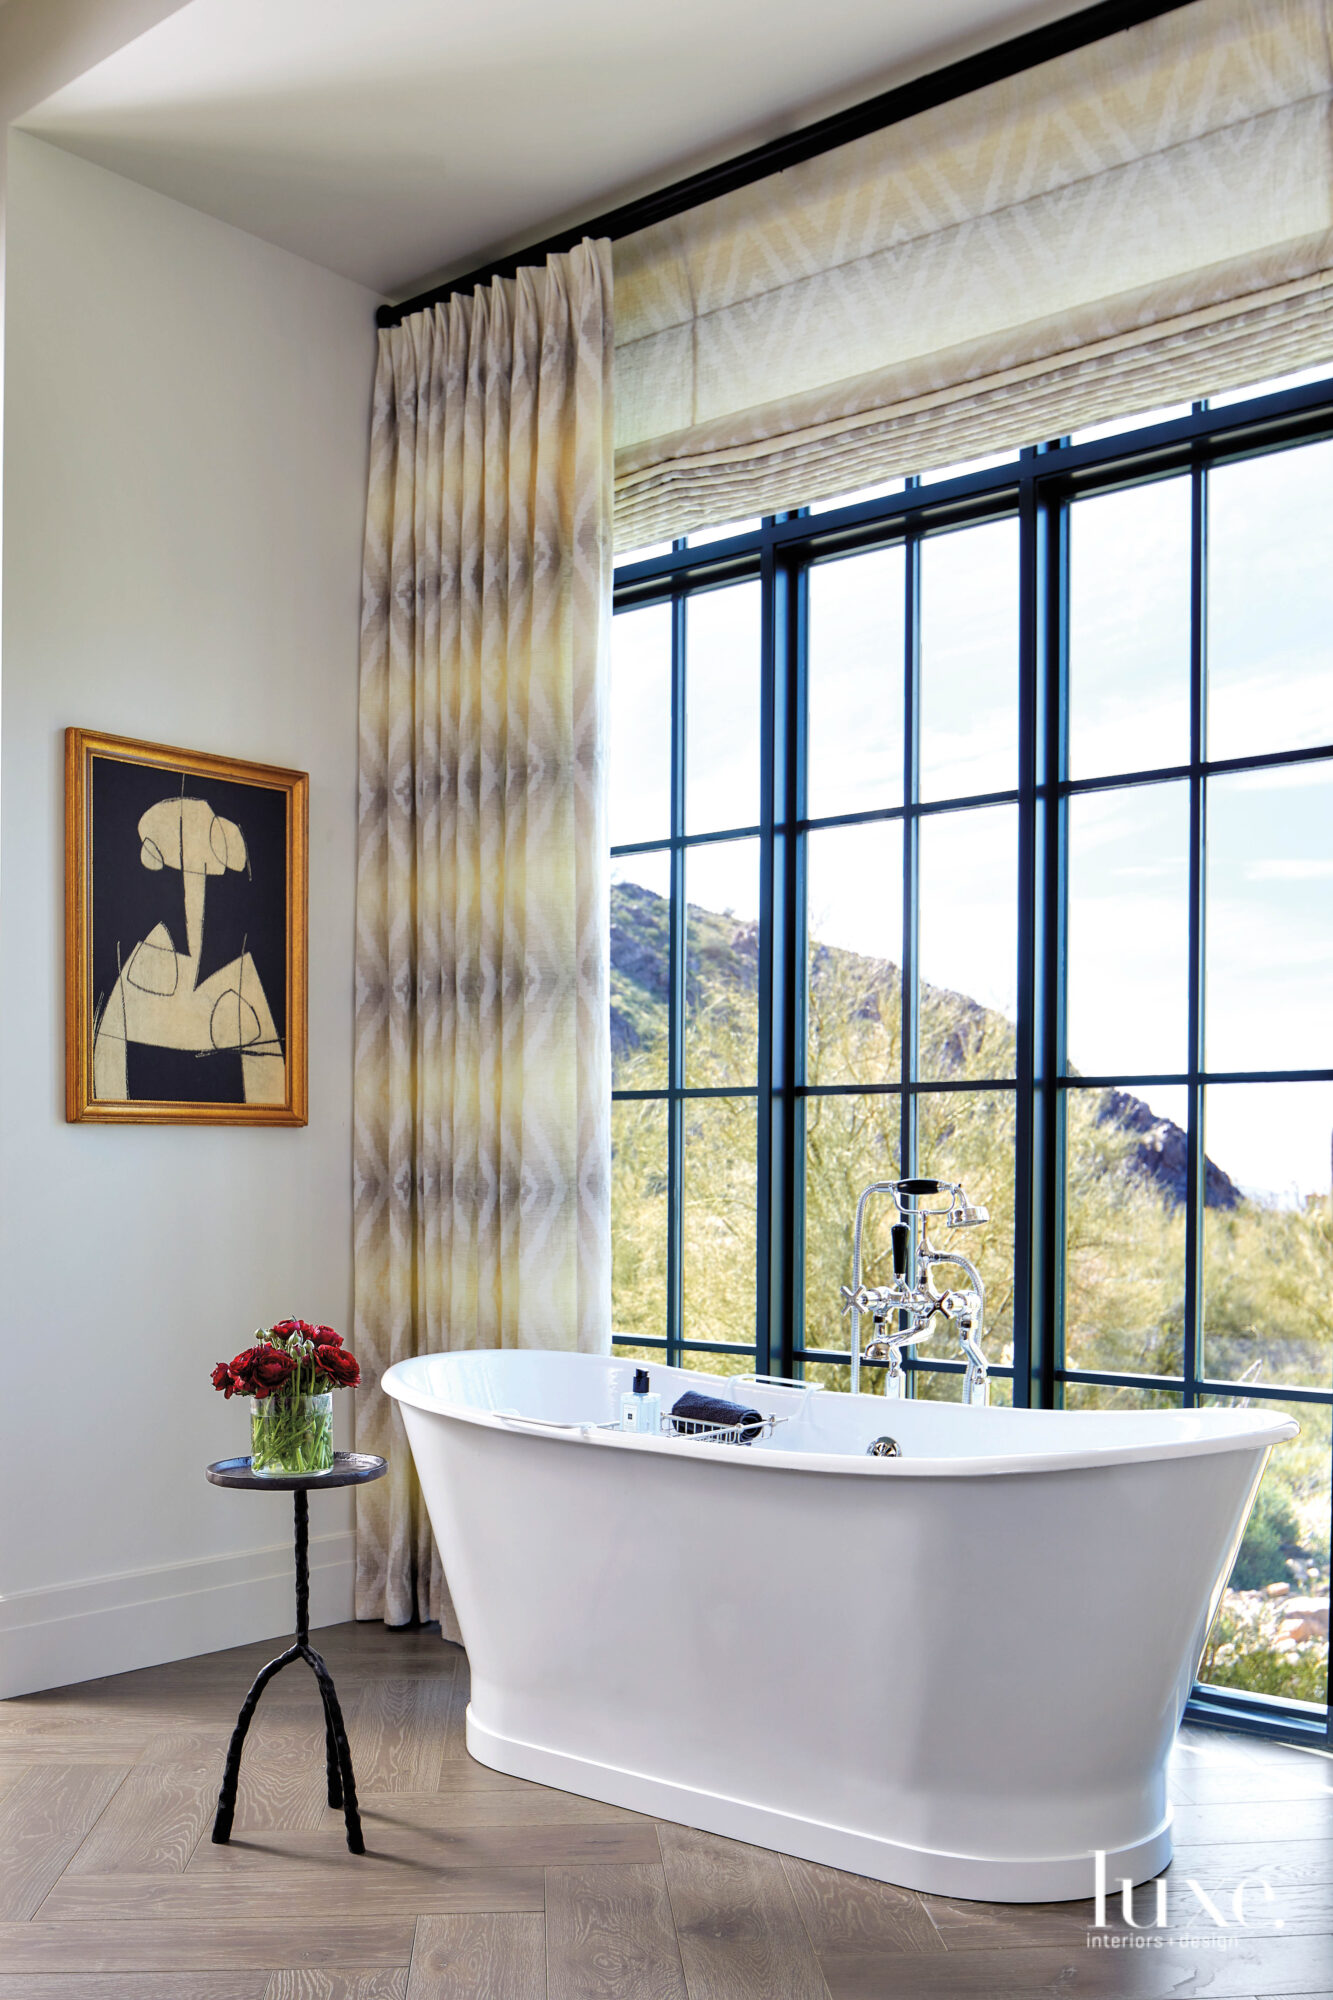 A freestanding bathtub sits in front of a large window in the master bathroom